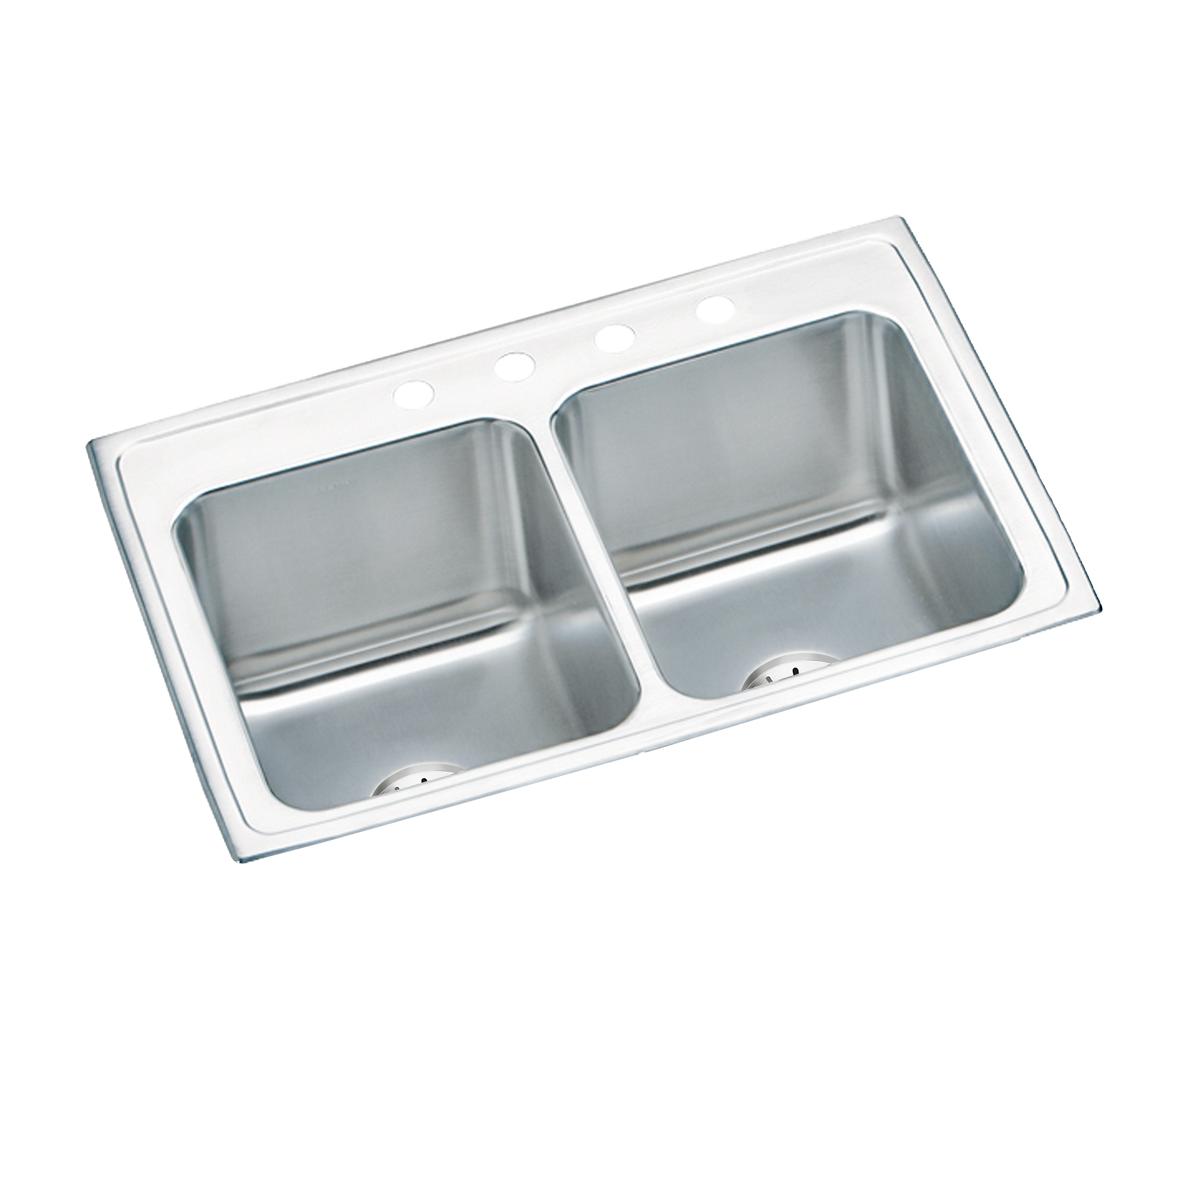 Elkay Lustertone Classic 33" x 22" x 10-1/8" Equal Double Bowl Drop-in Sink with Perfect Drain